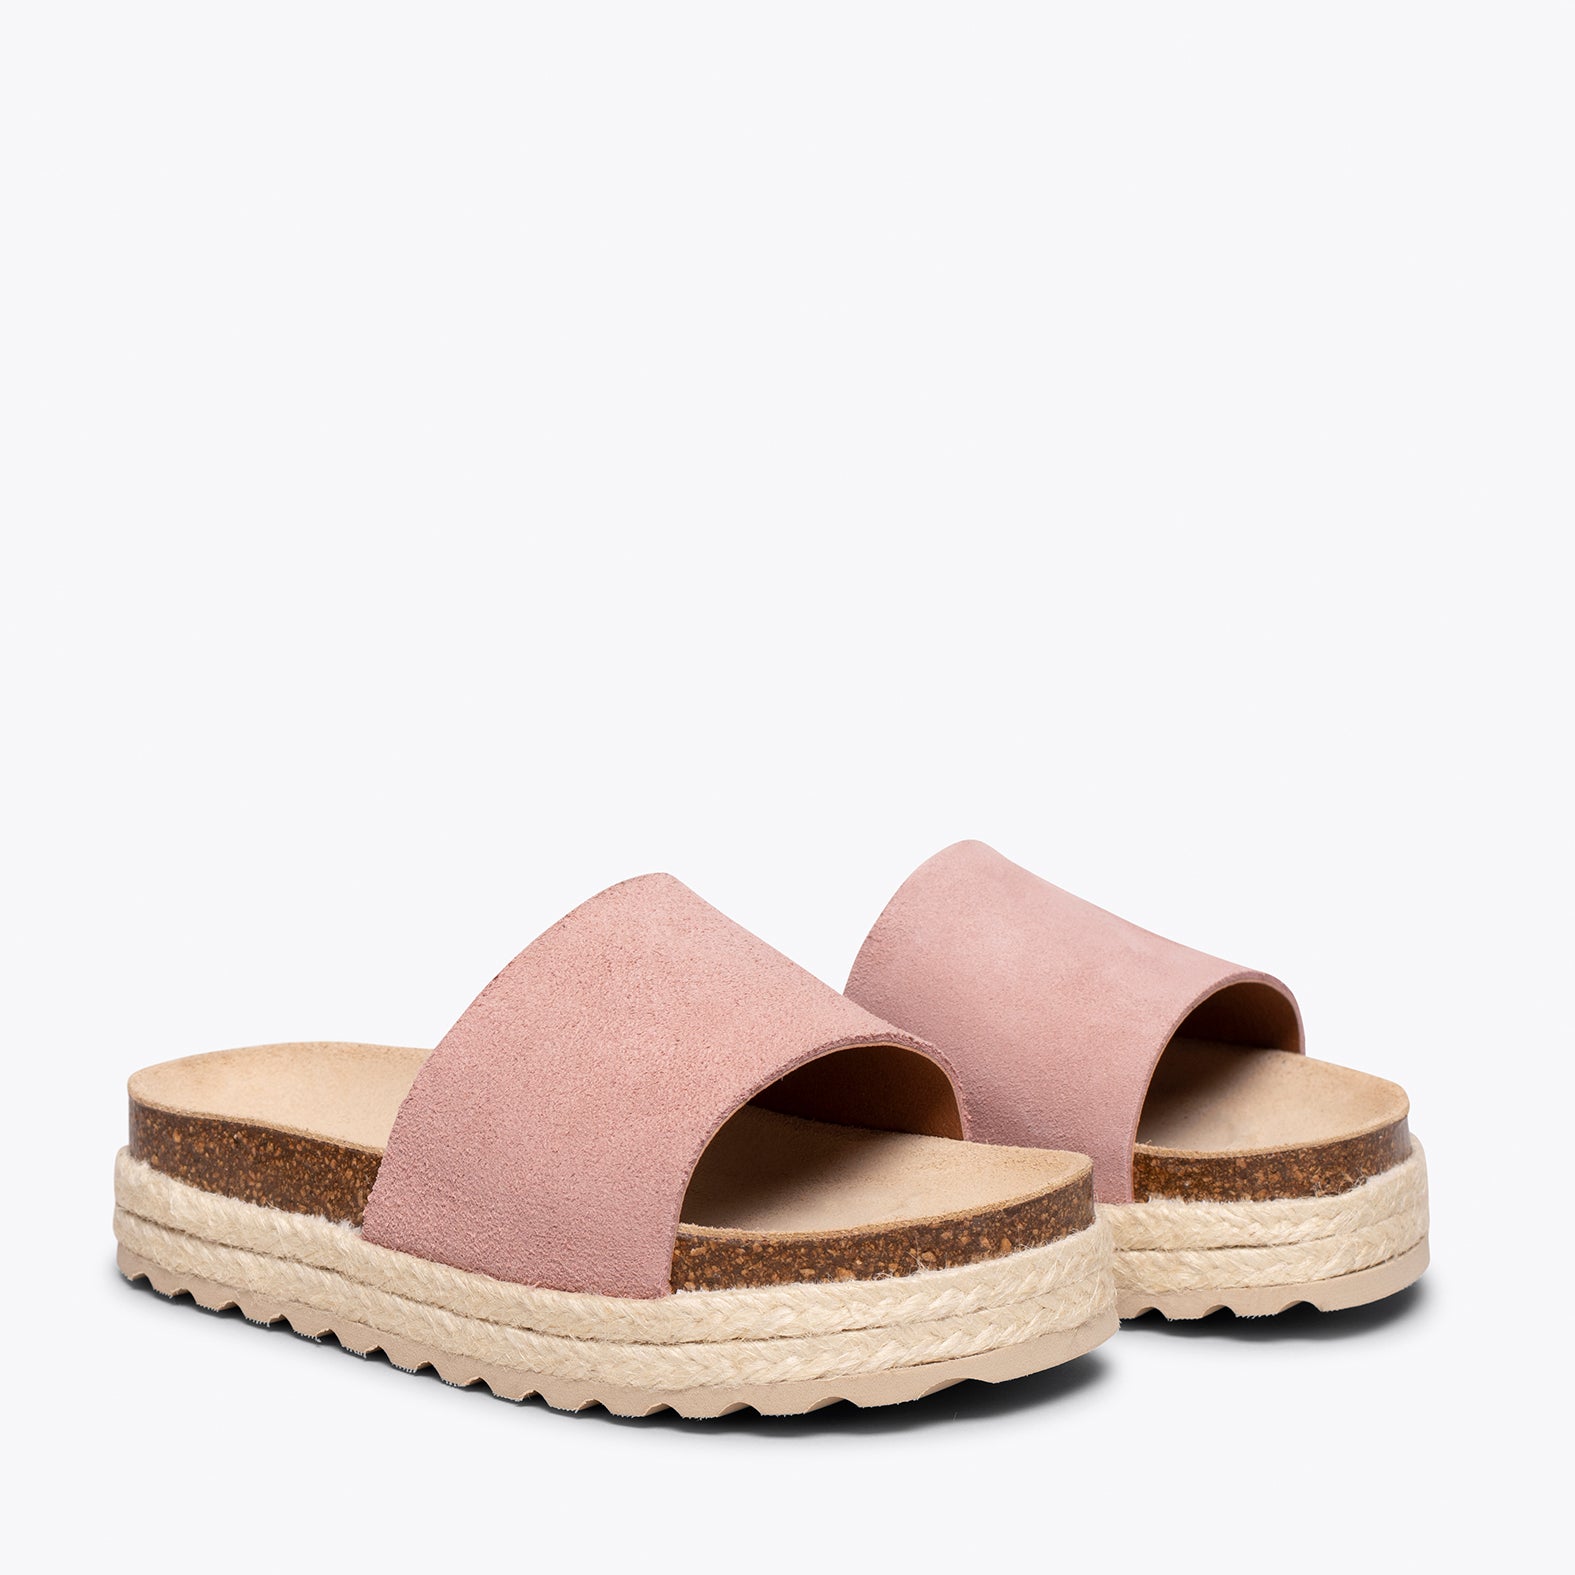 STRAWBERRY – PINK flat sandals for girls